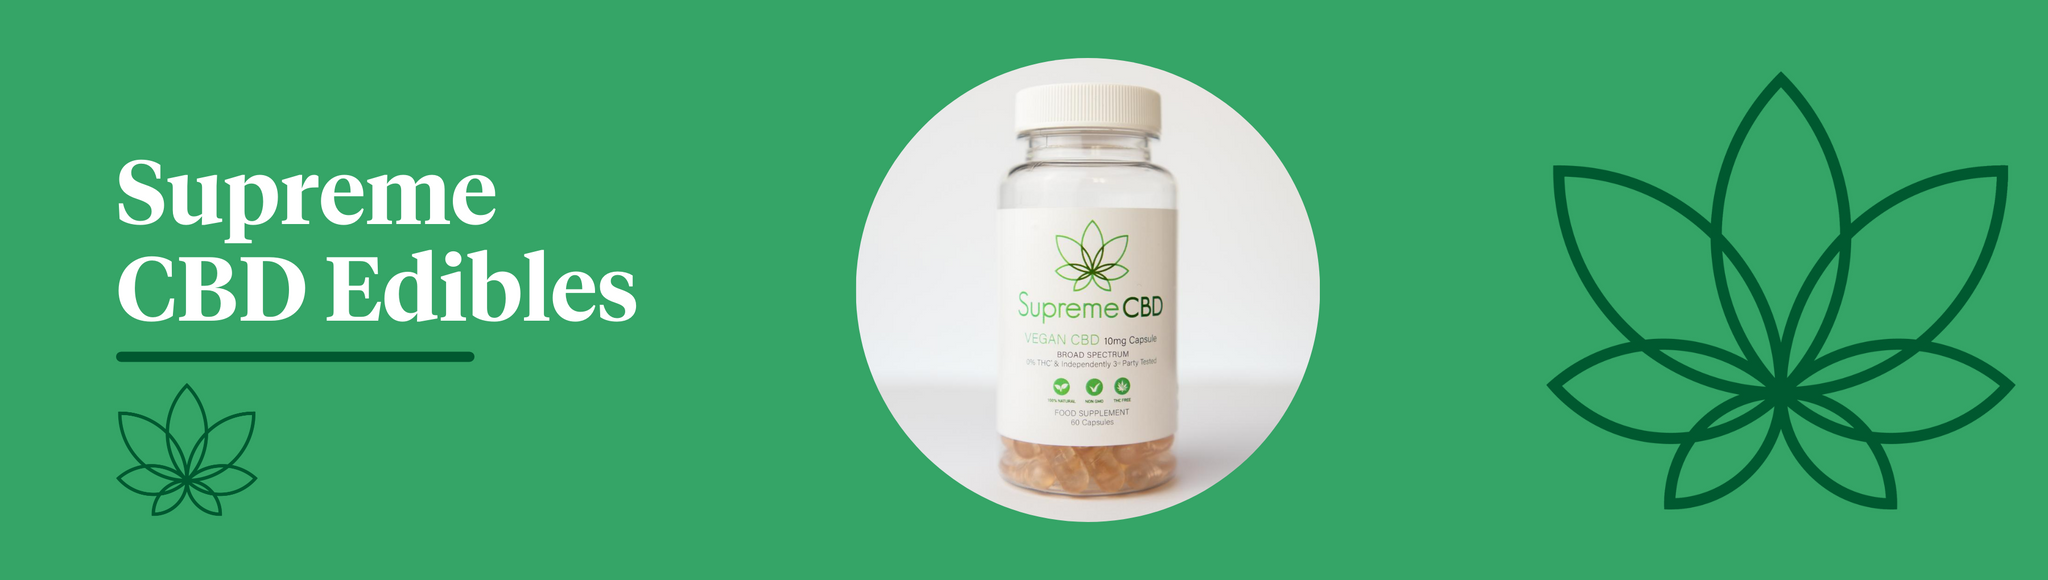 A green background with the Supreme CBD logo to the right and a bottle of Supreme CBD edible capsules in the centre